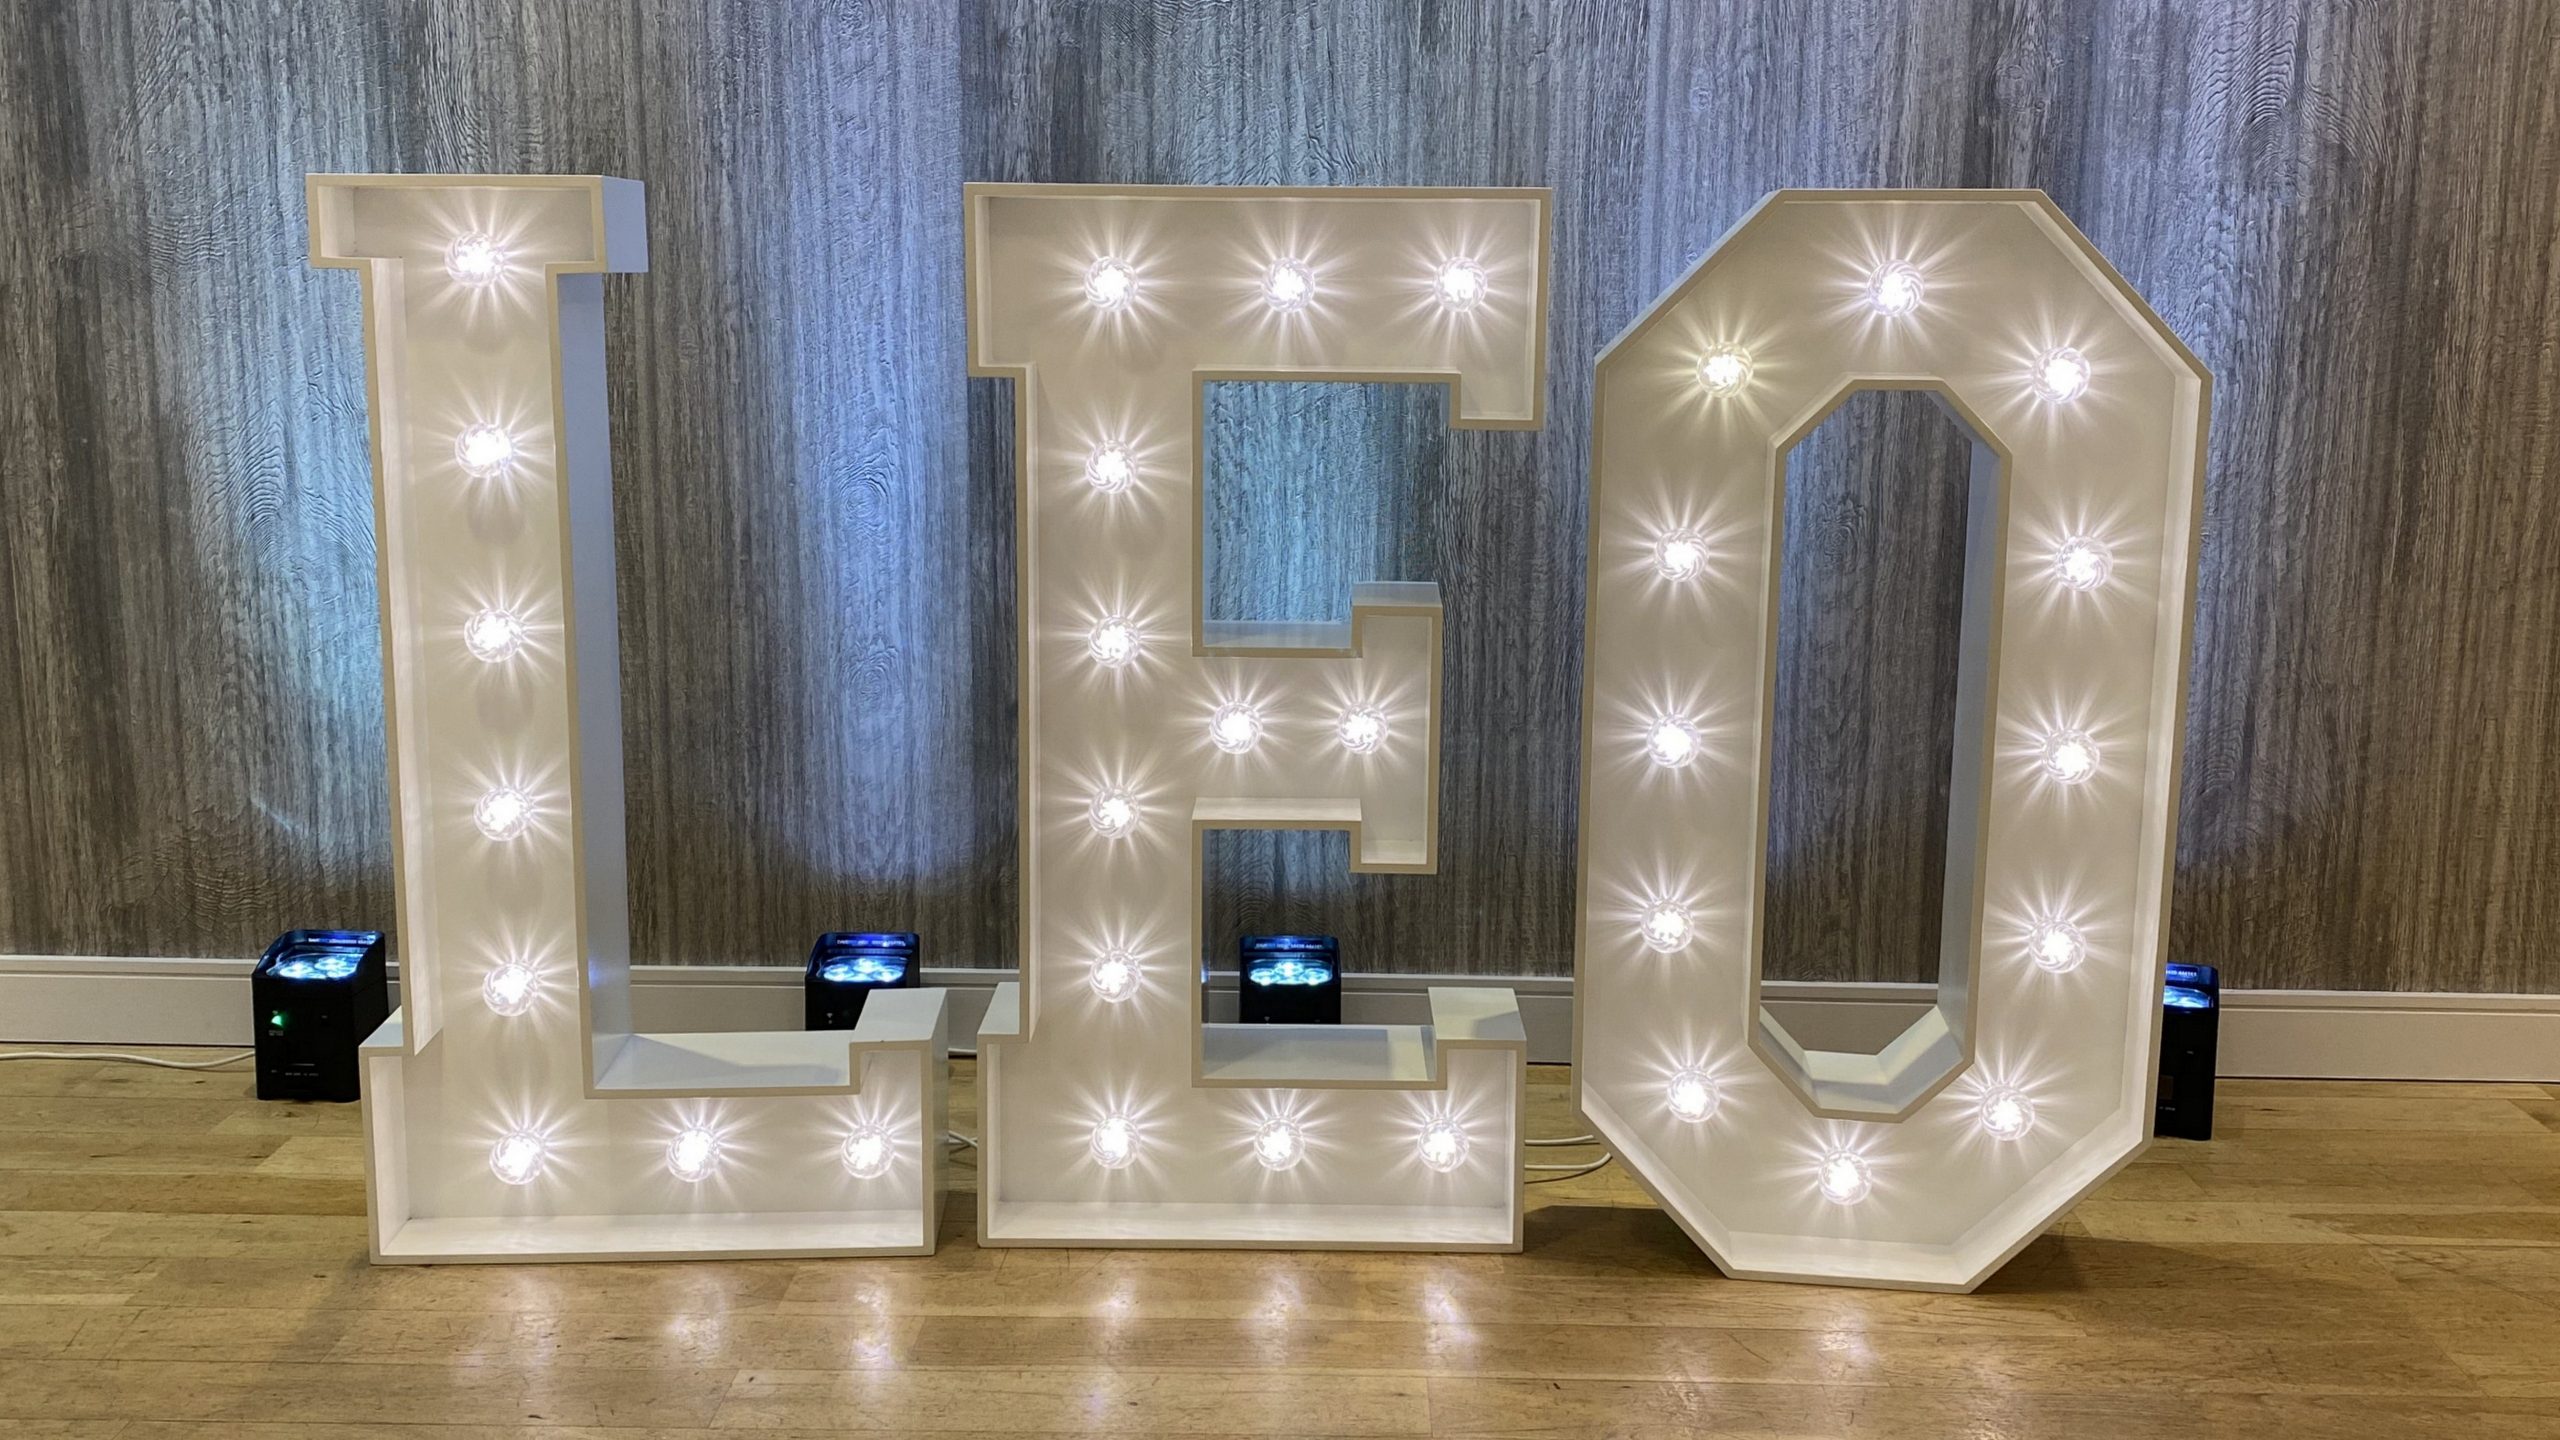 Light Up Light Hire Staffordshire Hire-Your-Initials-From-Light-Up-Letter-Hire-Staffordshire-4-1-scaled HOME